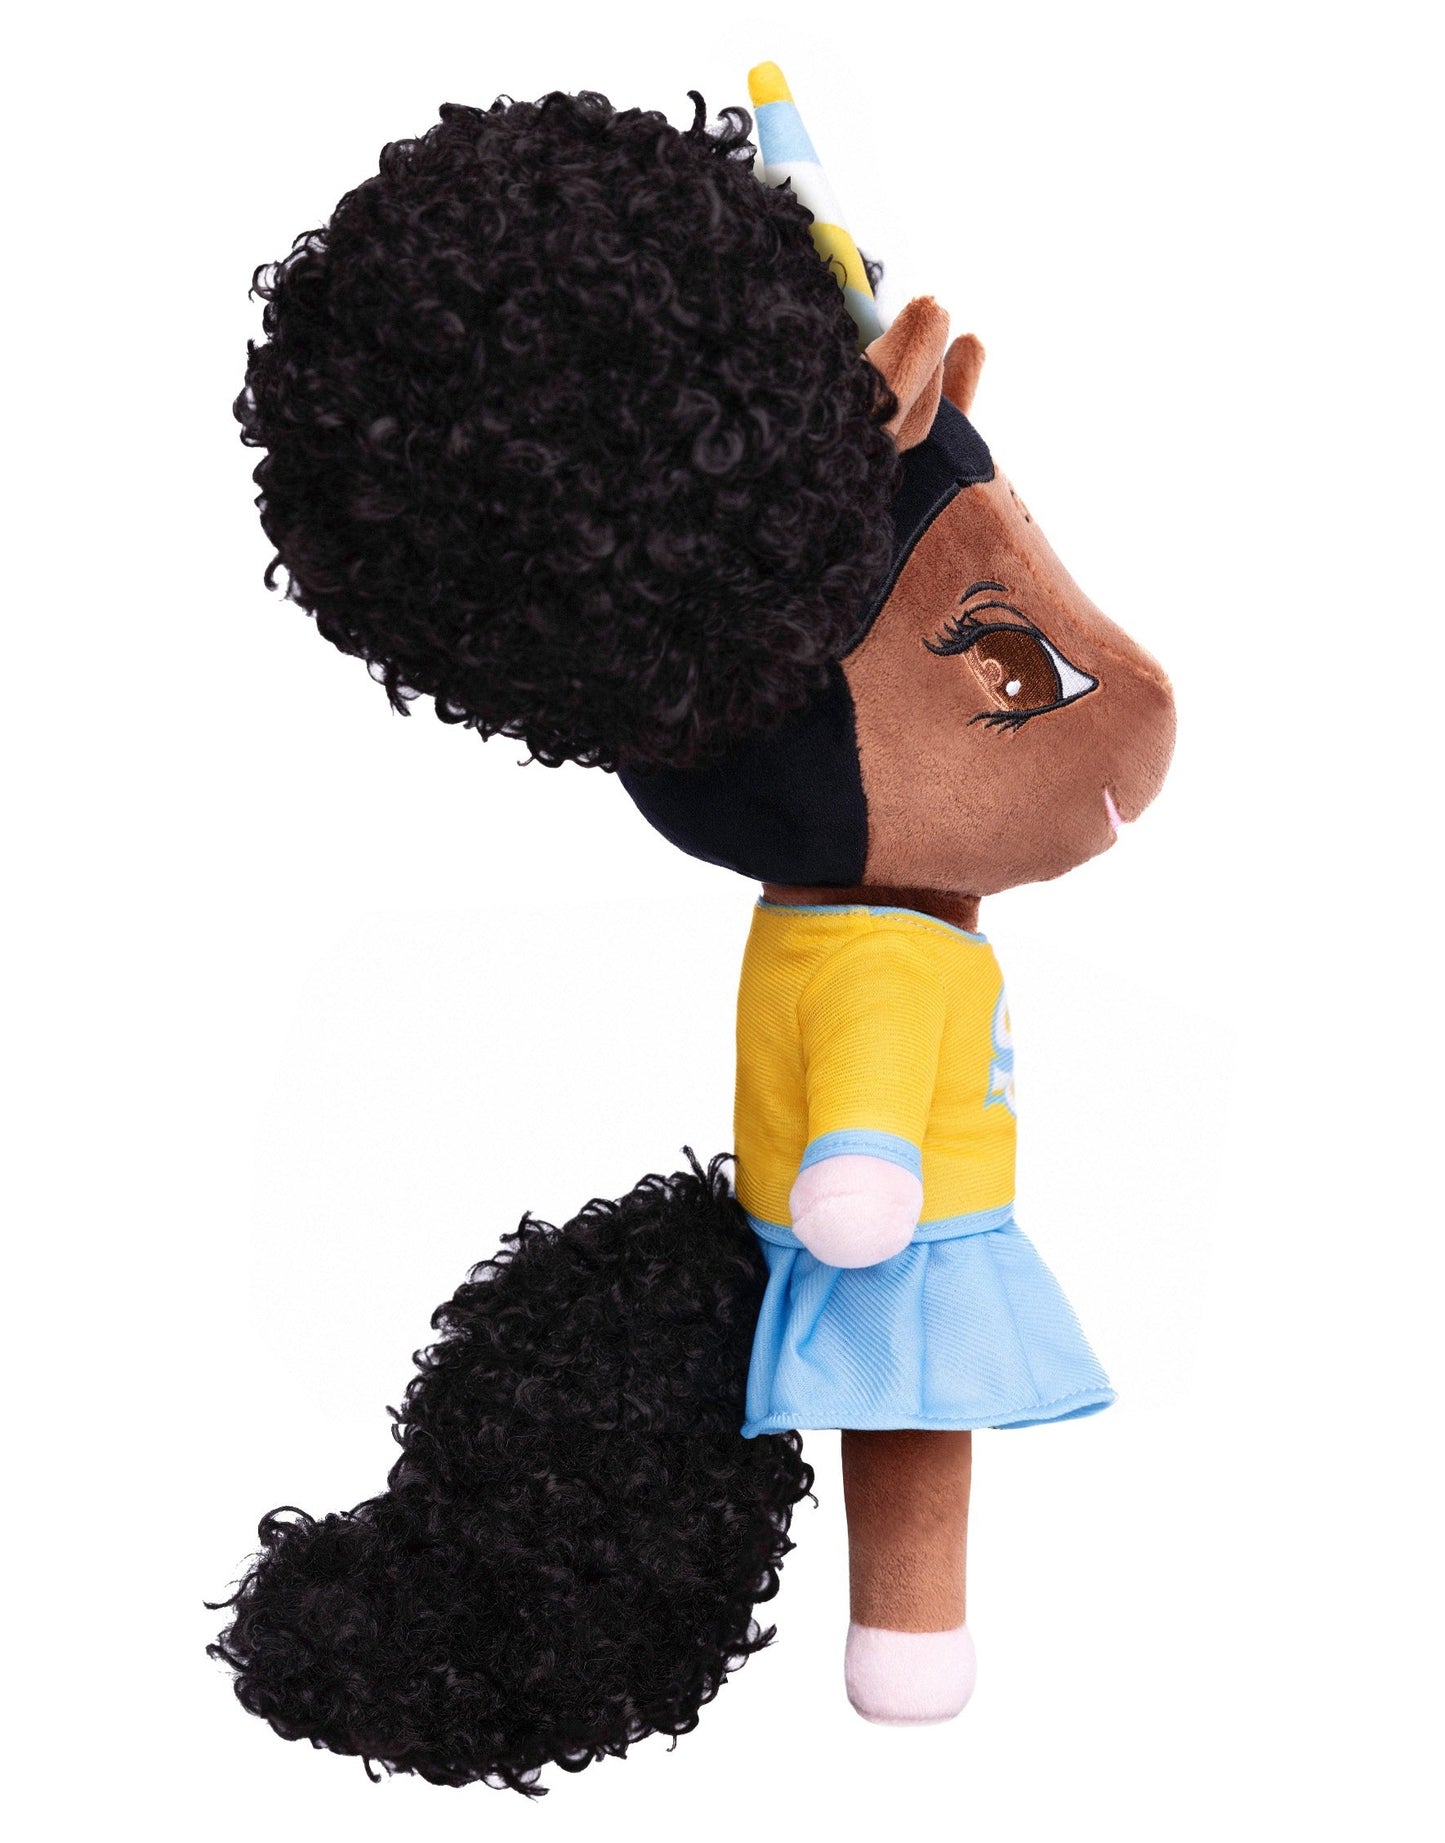 Southern University Unicorn Doll with Afro Puffs - 14 inch